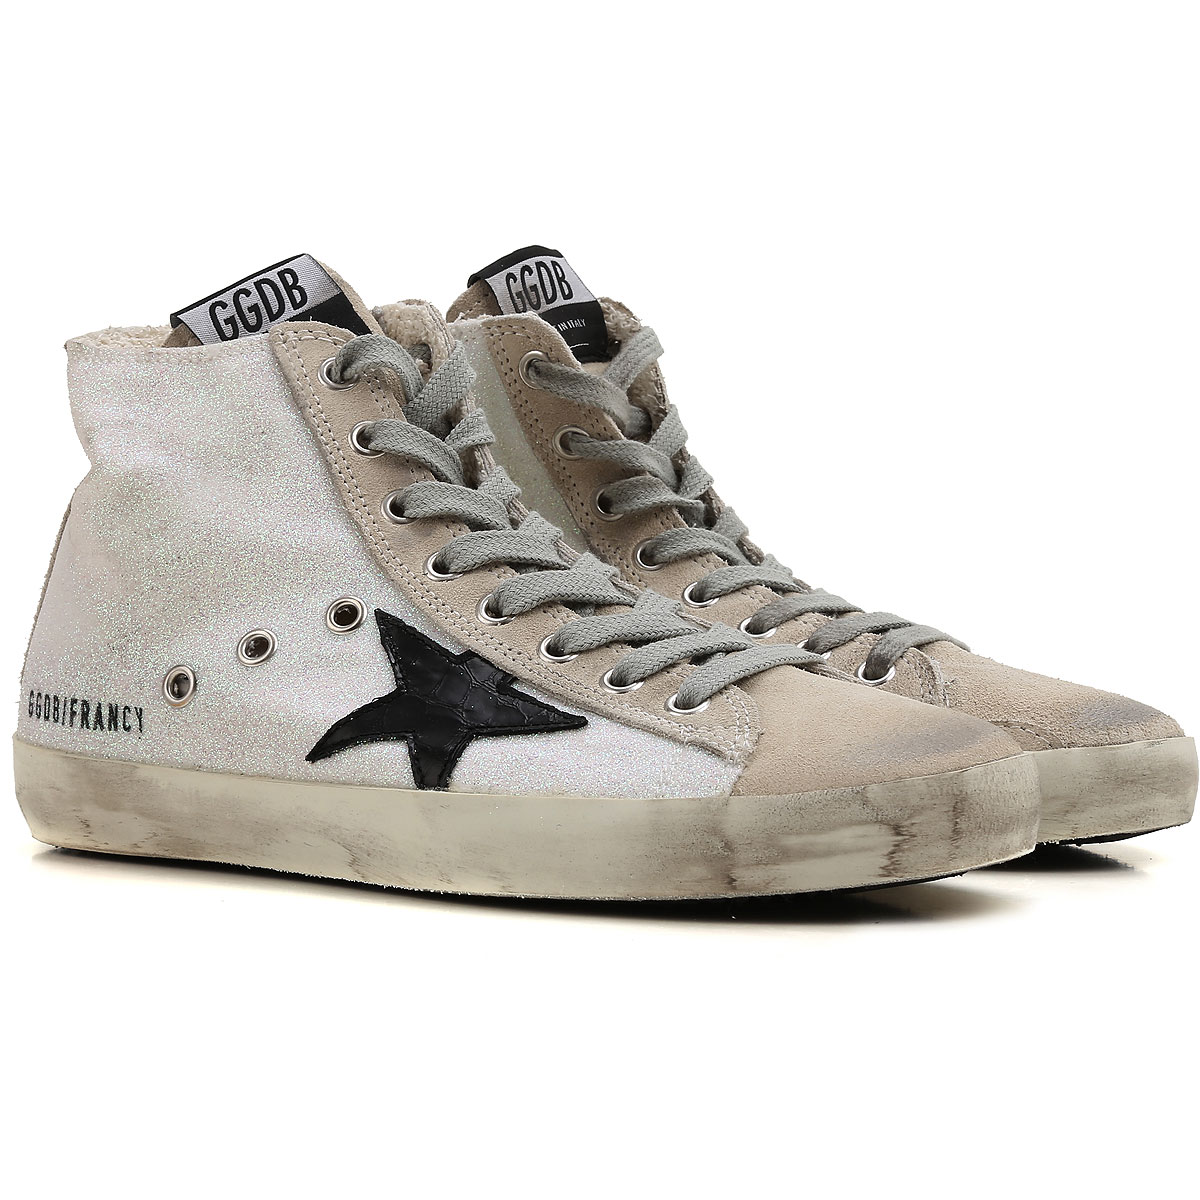 Womens Shoes Golden Goose, Style code: g31ws591-a88-